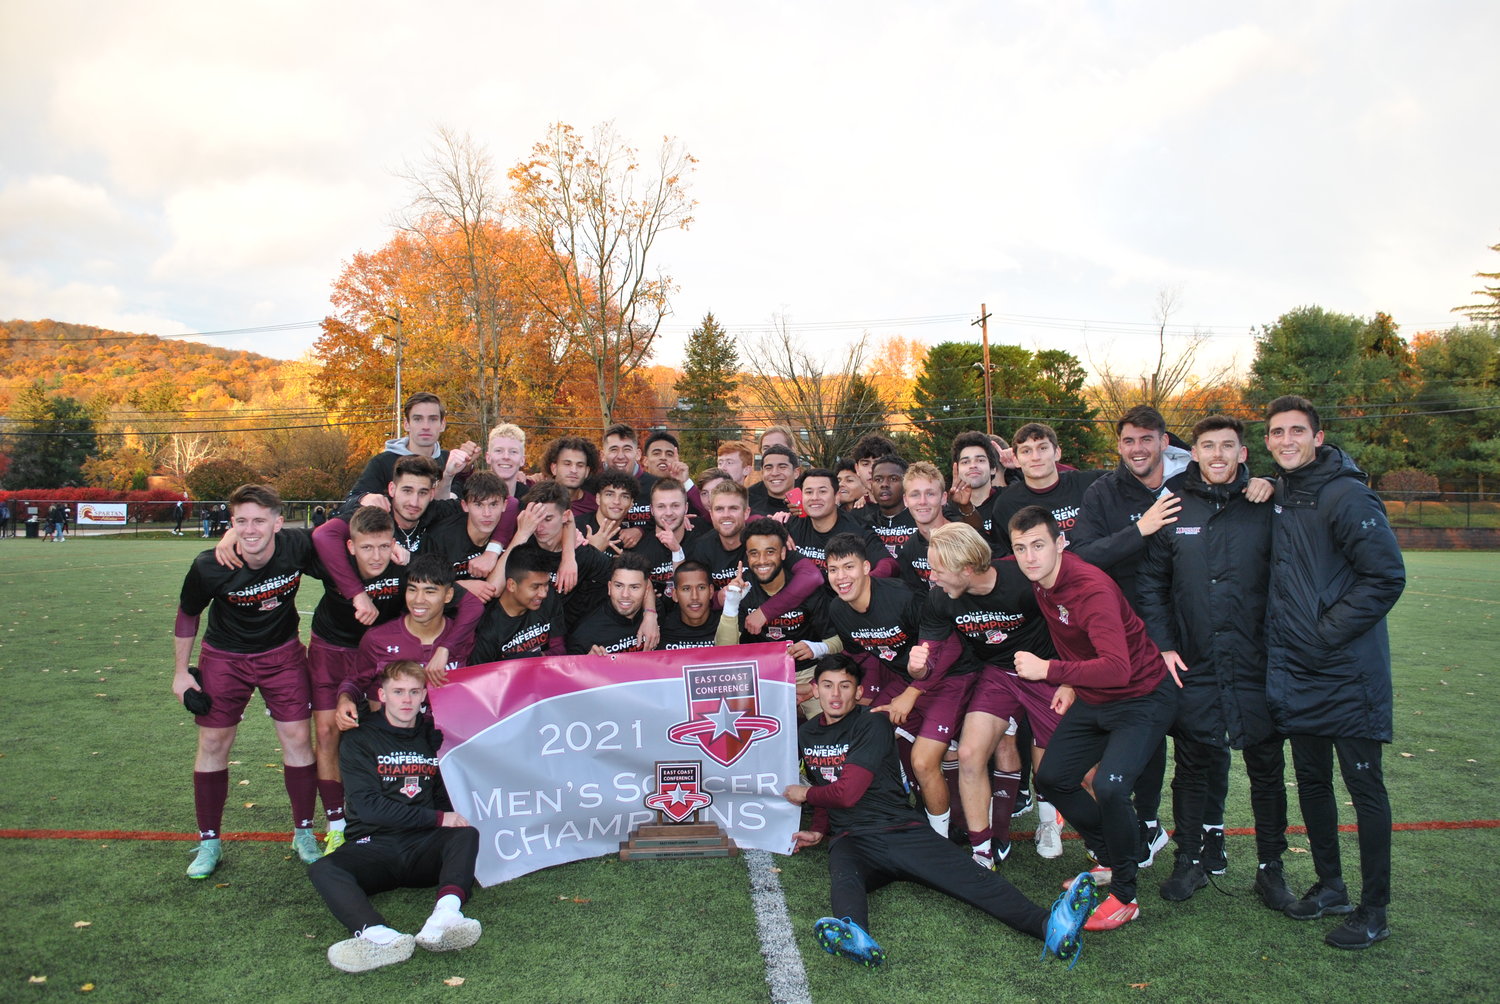 The Molloy men knocked off top-seeded STAC in penalty kicks 7-6 to win the ECC tournament for the first time since 2008.